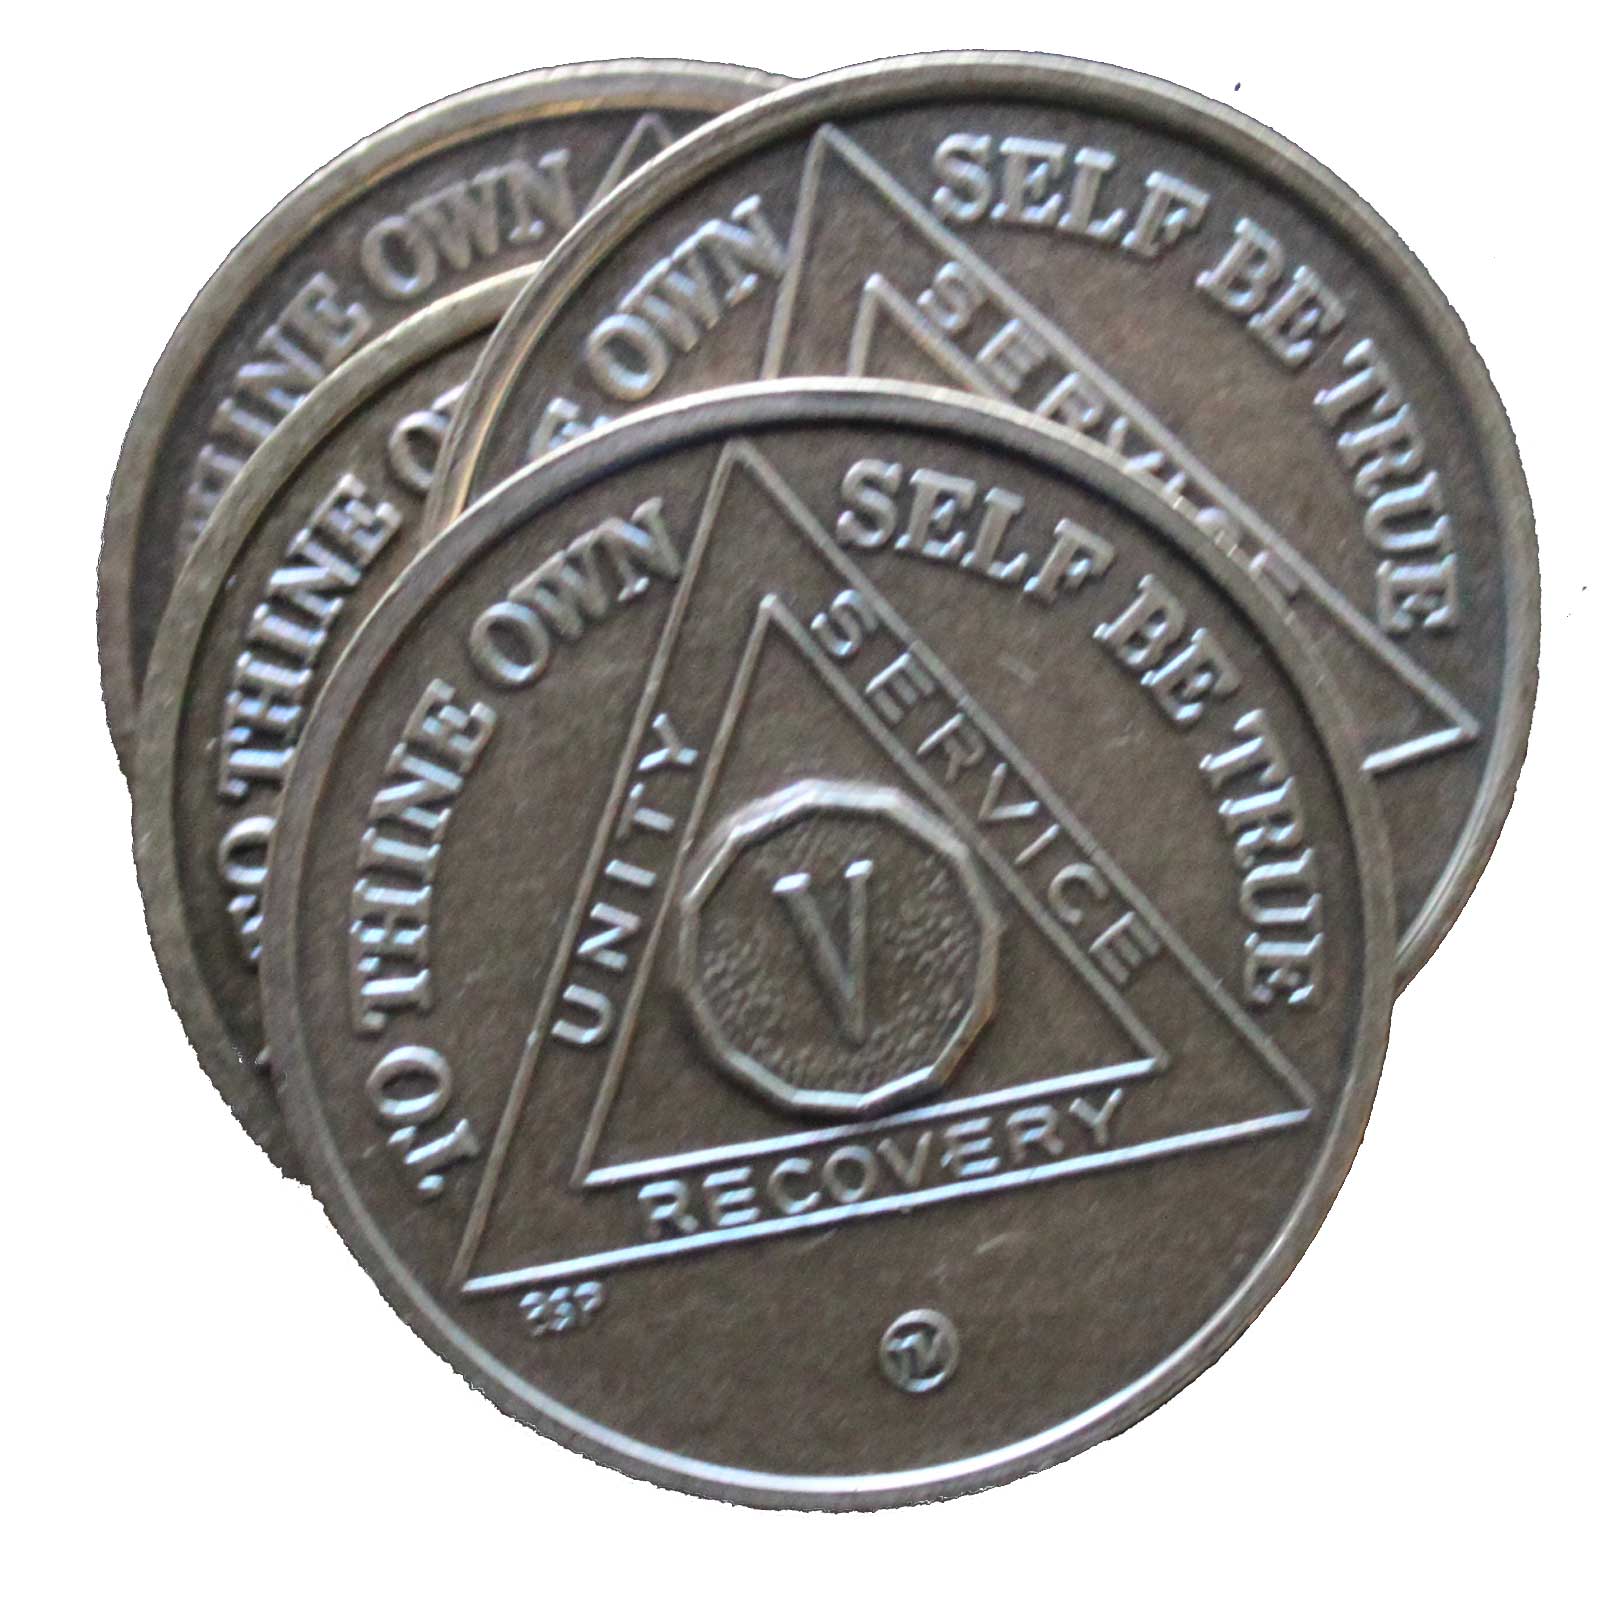 Recovery coins AA 37 Year Bronze Medallion tokens sobriety affirmation birthday 